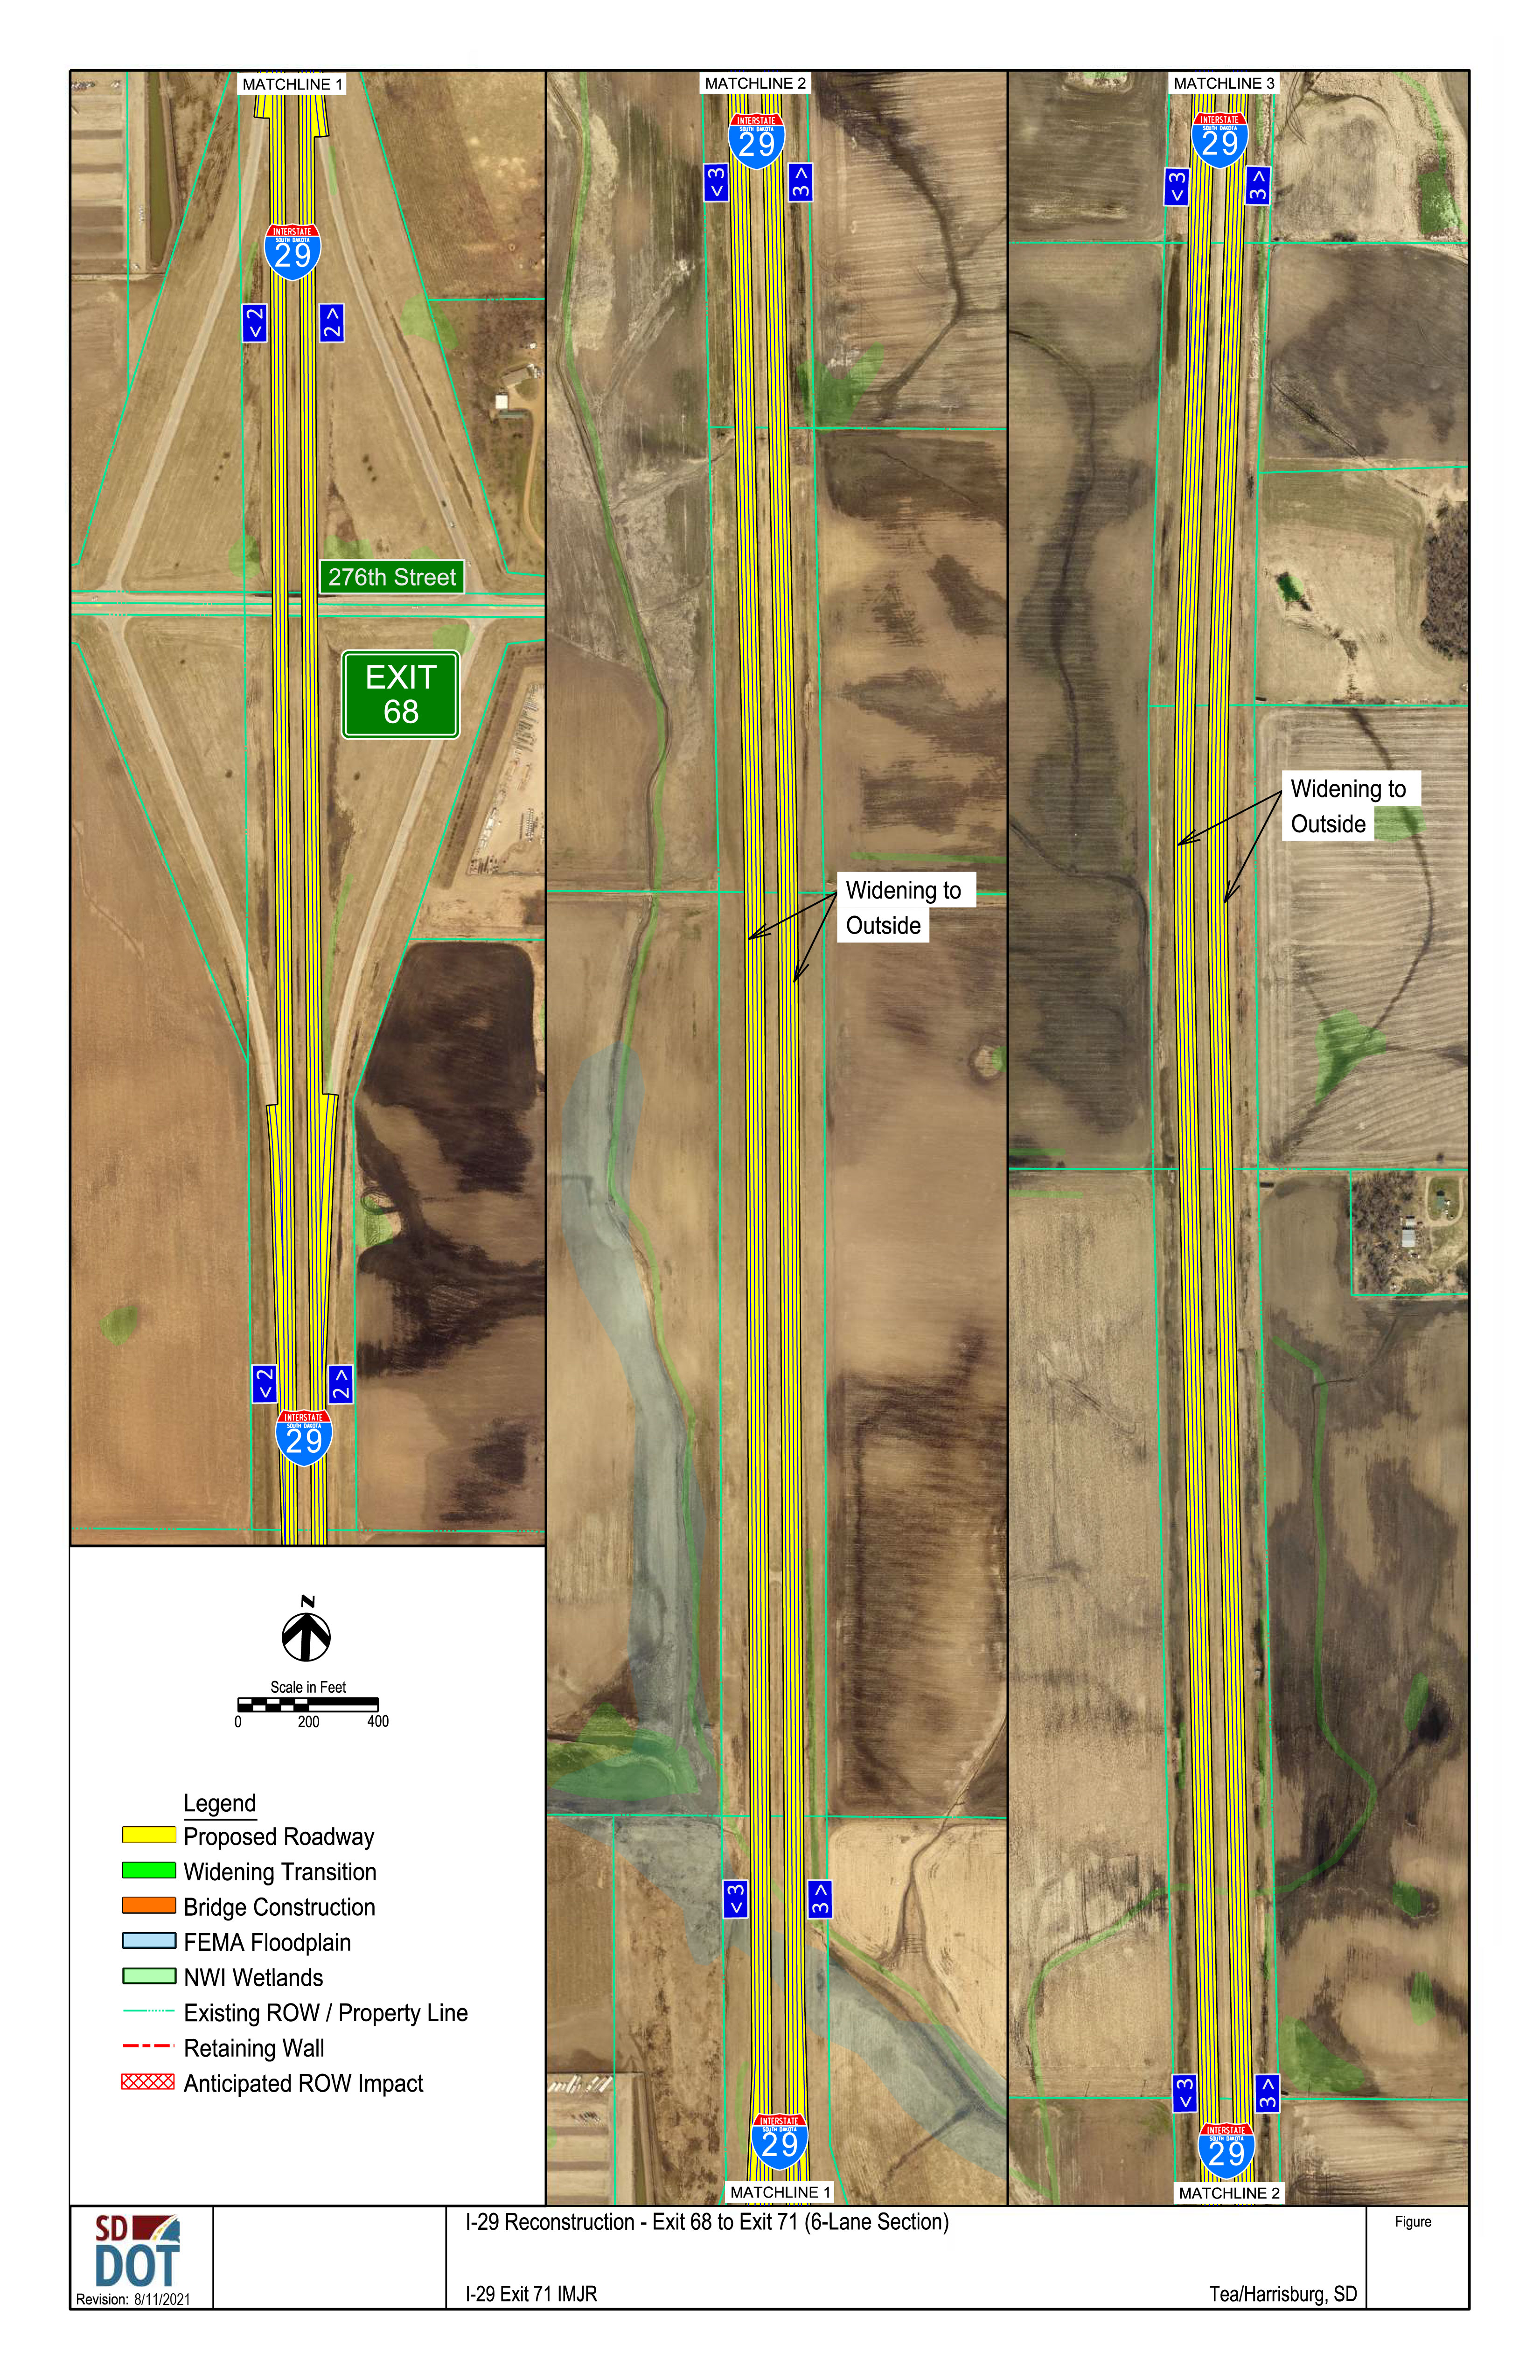 This image shows the conceptual layout of a 6-lane construction from exits 68 to 71. Details on the diagram include the proposed roadway, the widening transition, bridge construction, FEMA floodplain, NWI Wetlands, existing right of way and property lines, retaining walls and anticipated right of way impacts.